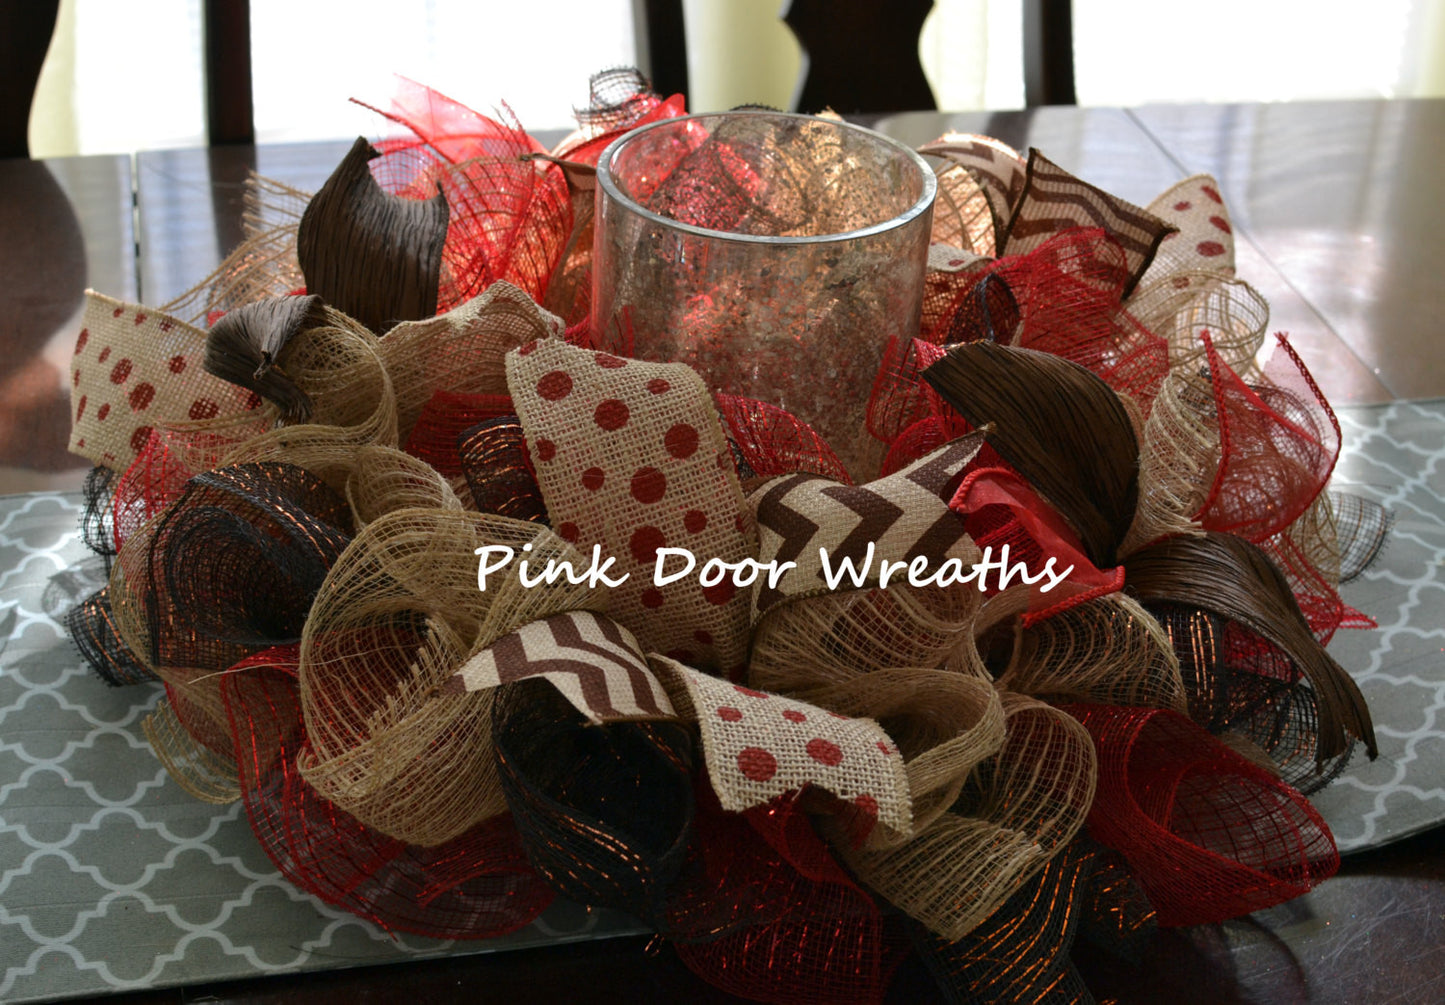 Year Round Living Room Table Centerpiece Candle Holder | Red Burlap Jute Chocolate Brown - Pink Door Wreaths